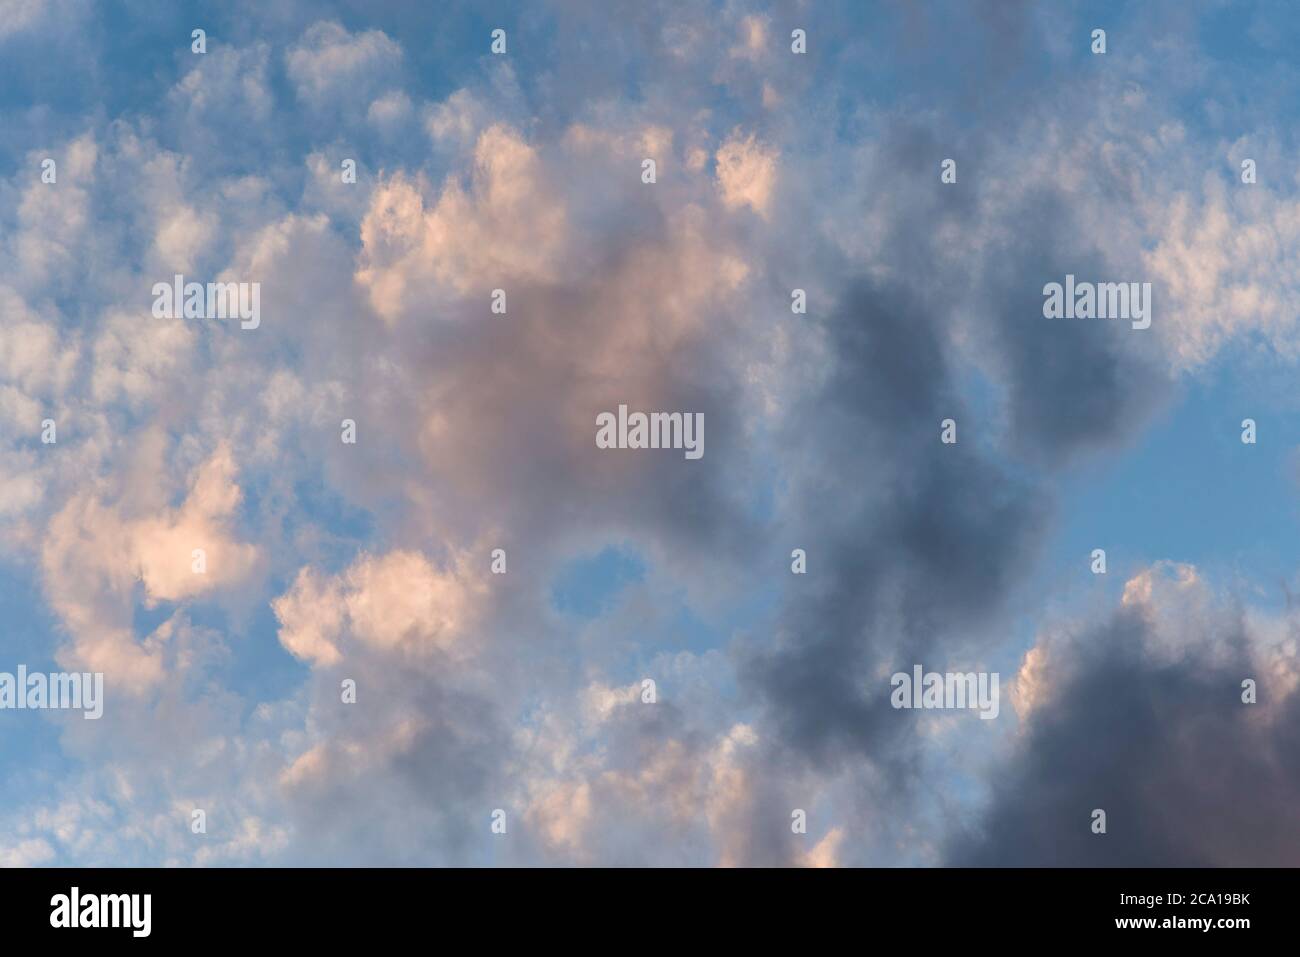 Cloudscape: cloudy sky, grey and white clouds illuminated by the evening sun over a bright blue sky Stock Photo